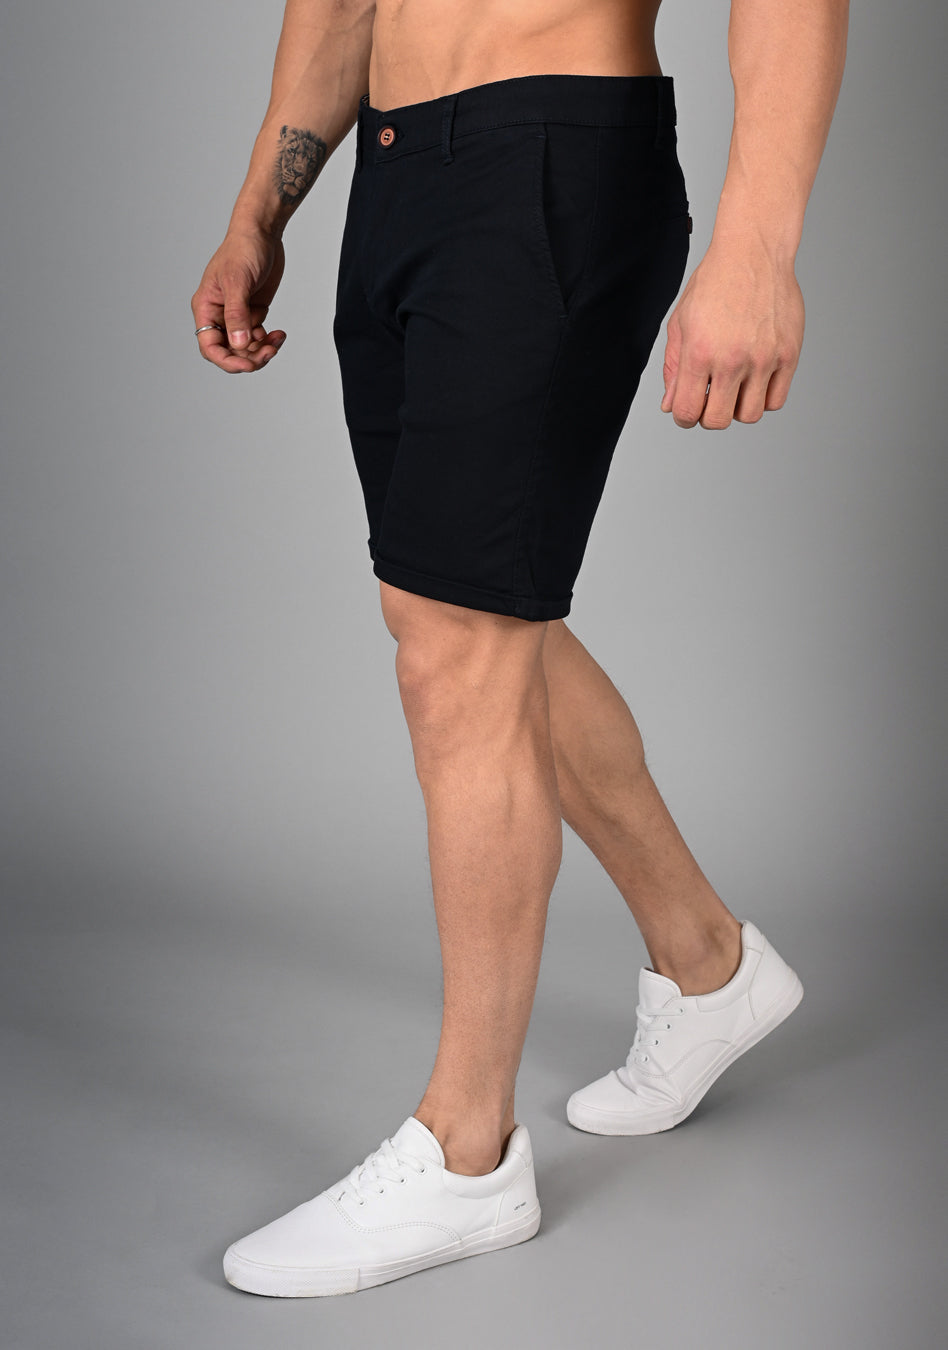 Comfortable navy blue muscle fit shorts with an adaptive muscle fit design for enhanced movement and durability, ideal for exercise and casual wear.